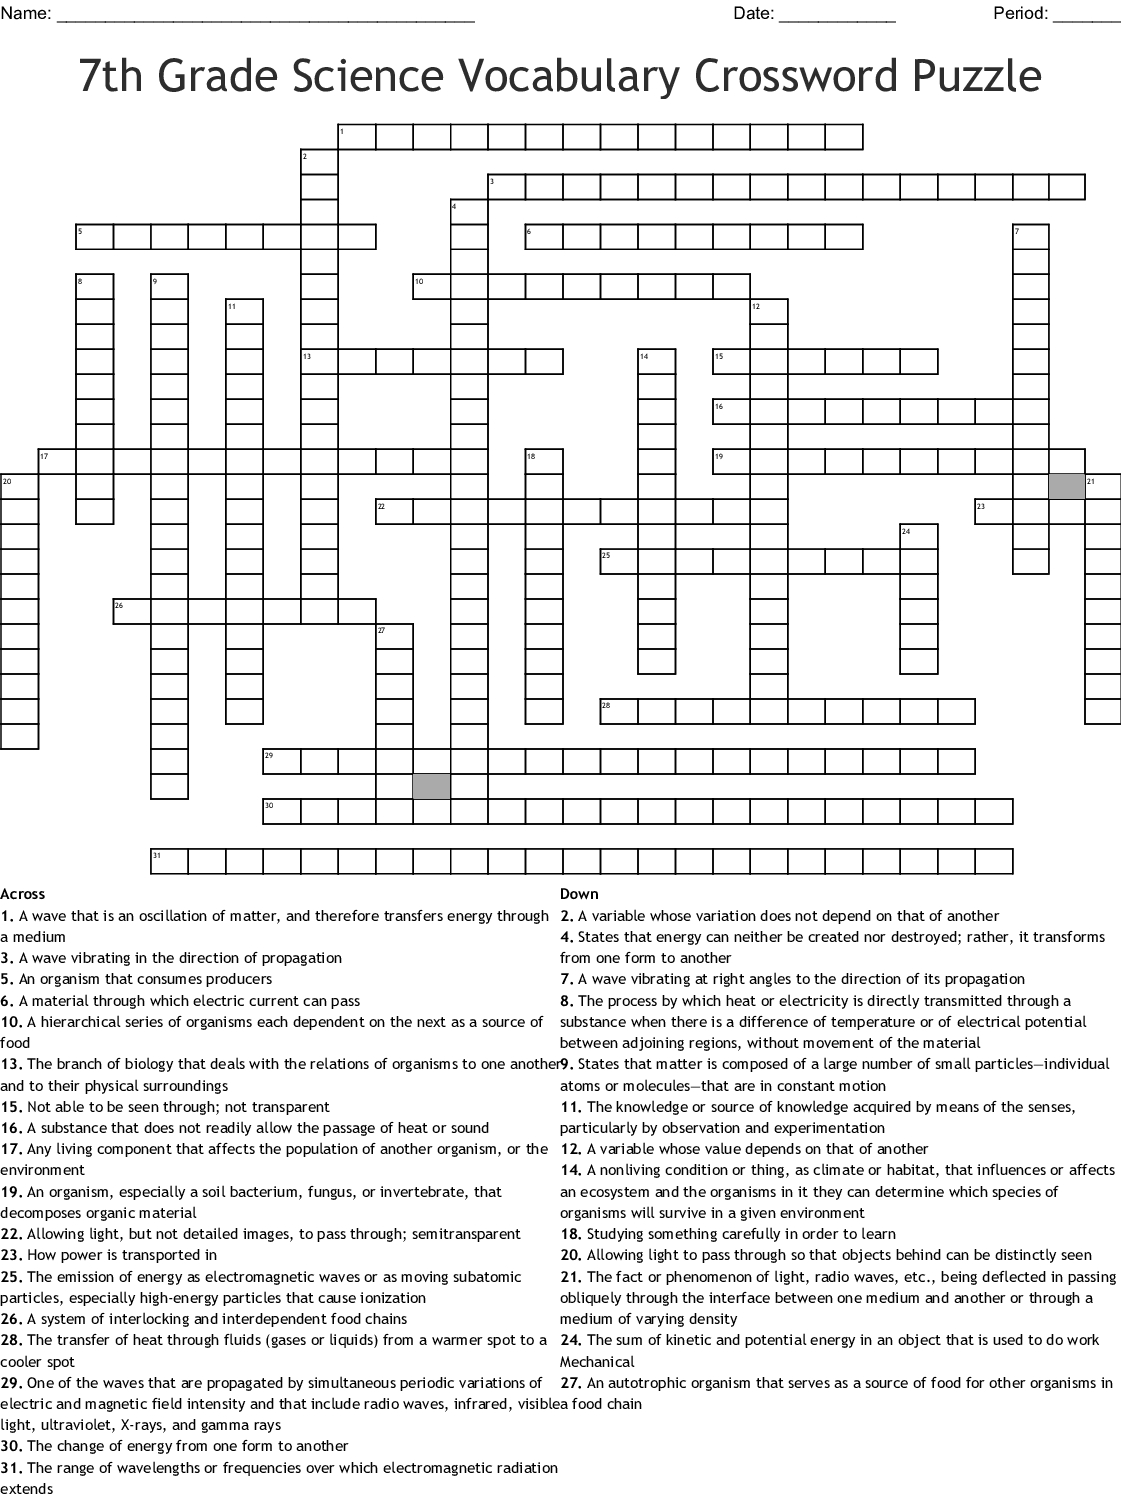 Free Printable Crossword Puzzles For 7th Graders